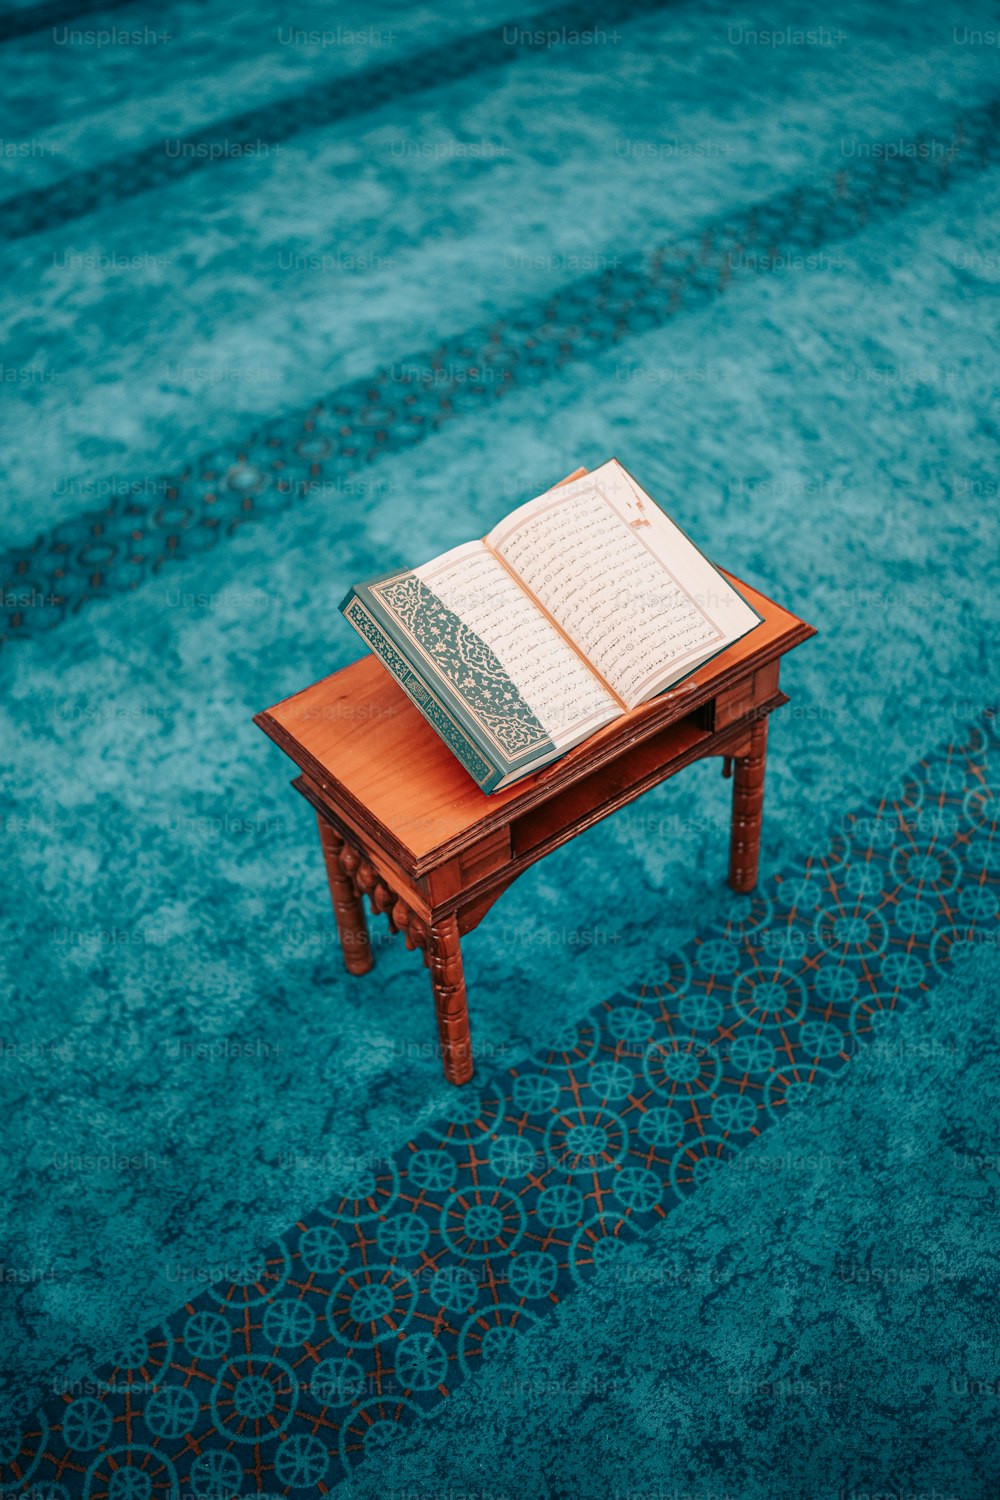 a wooden table with a book on top of it